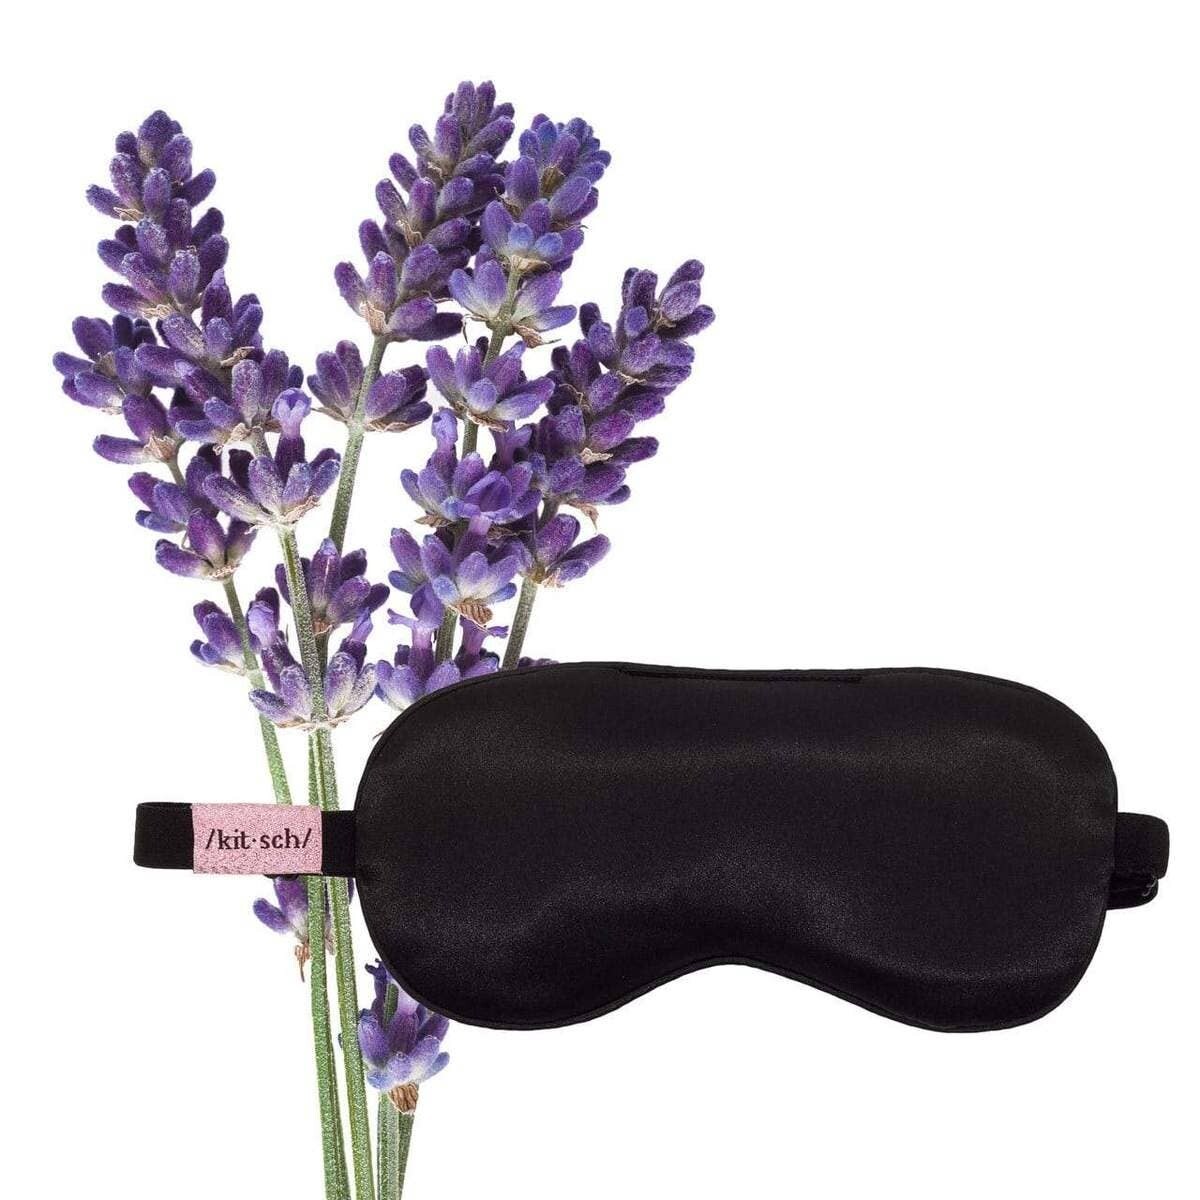 Weighted Eye Mask- Lavender